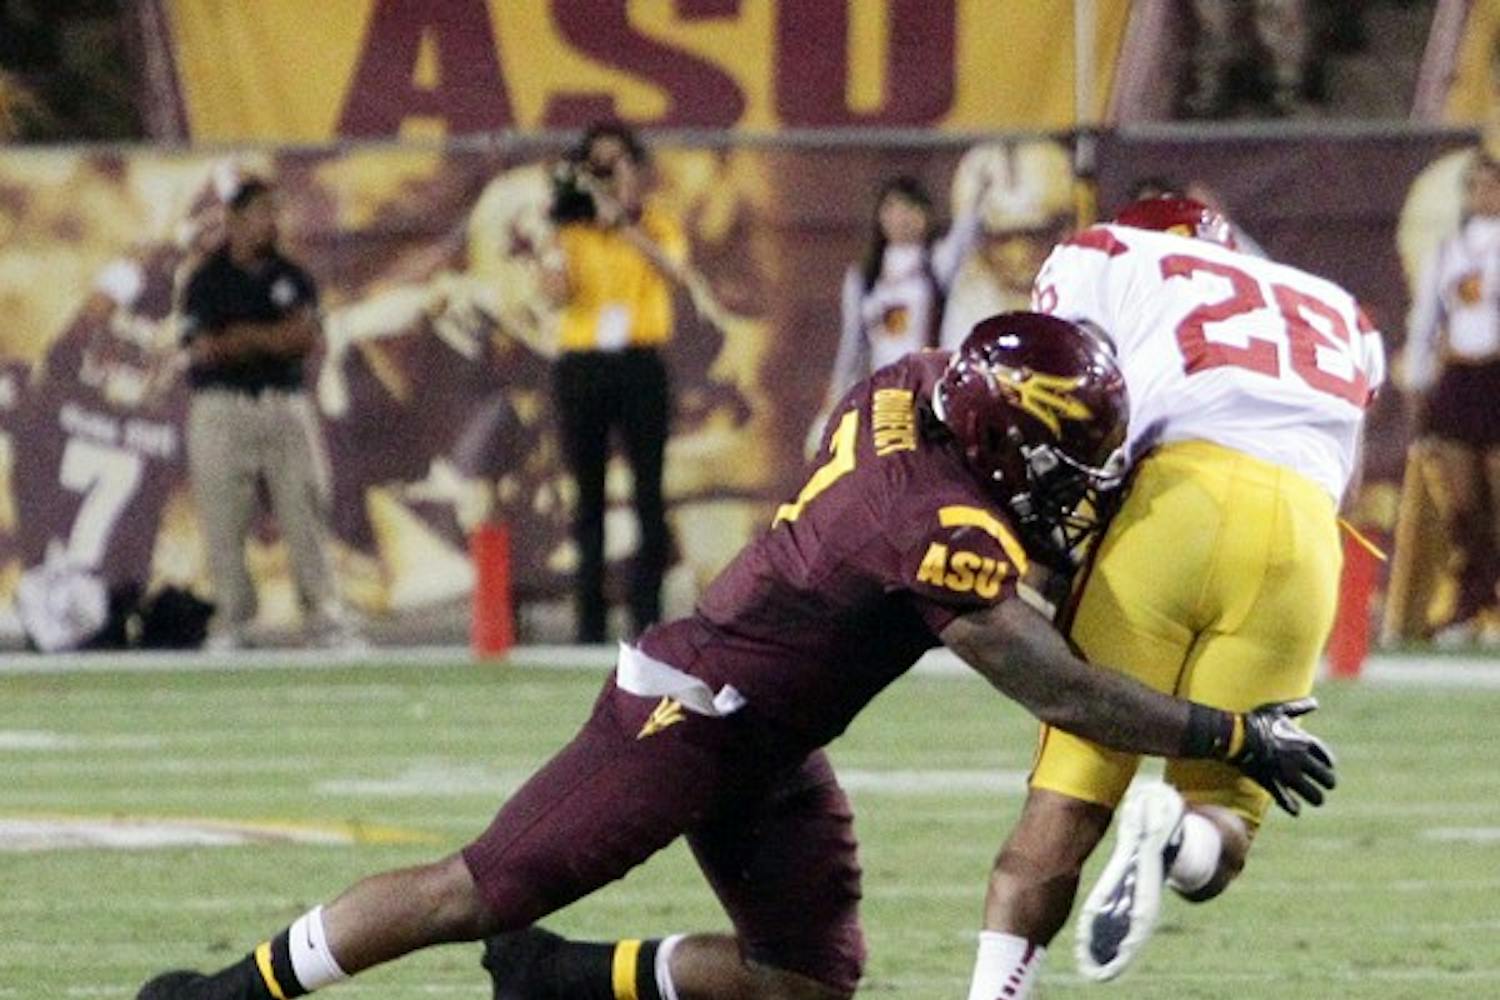 UNDER CONTROL: Junior linebacker Vontaze Burfict wraps up USC redshirt senior tailback Marc Tyler during the Sun Devils’ 43-22 win over the Trojans on Saturday. ASU appears to be the better team against Oregon State coming into Saturday’s matchup against the Beavers. (Photo by Beth Easterbrook)